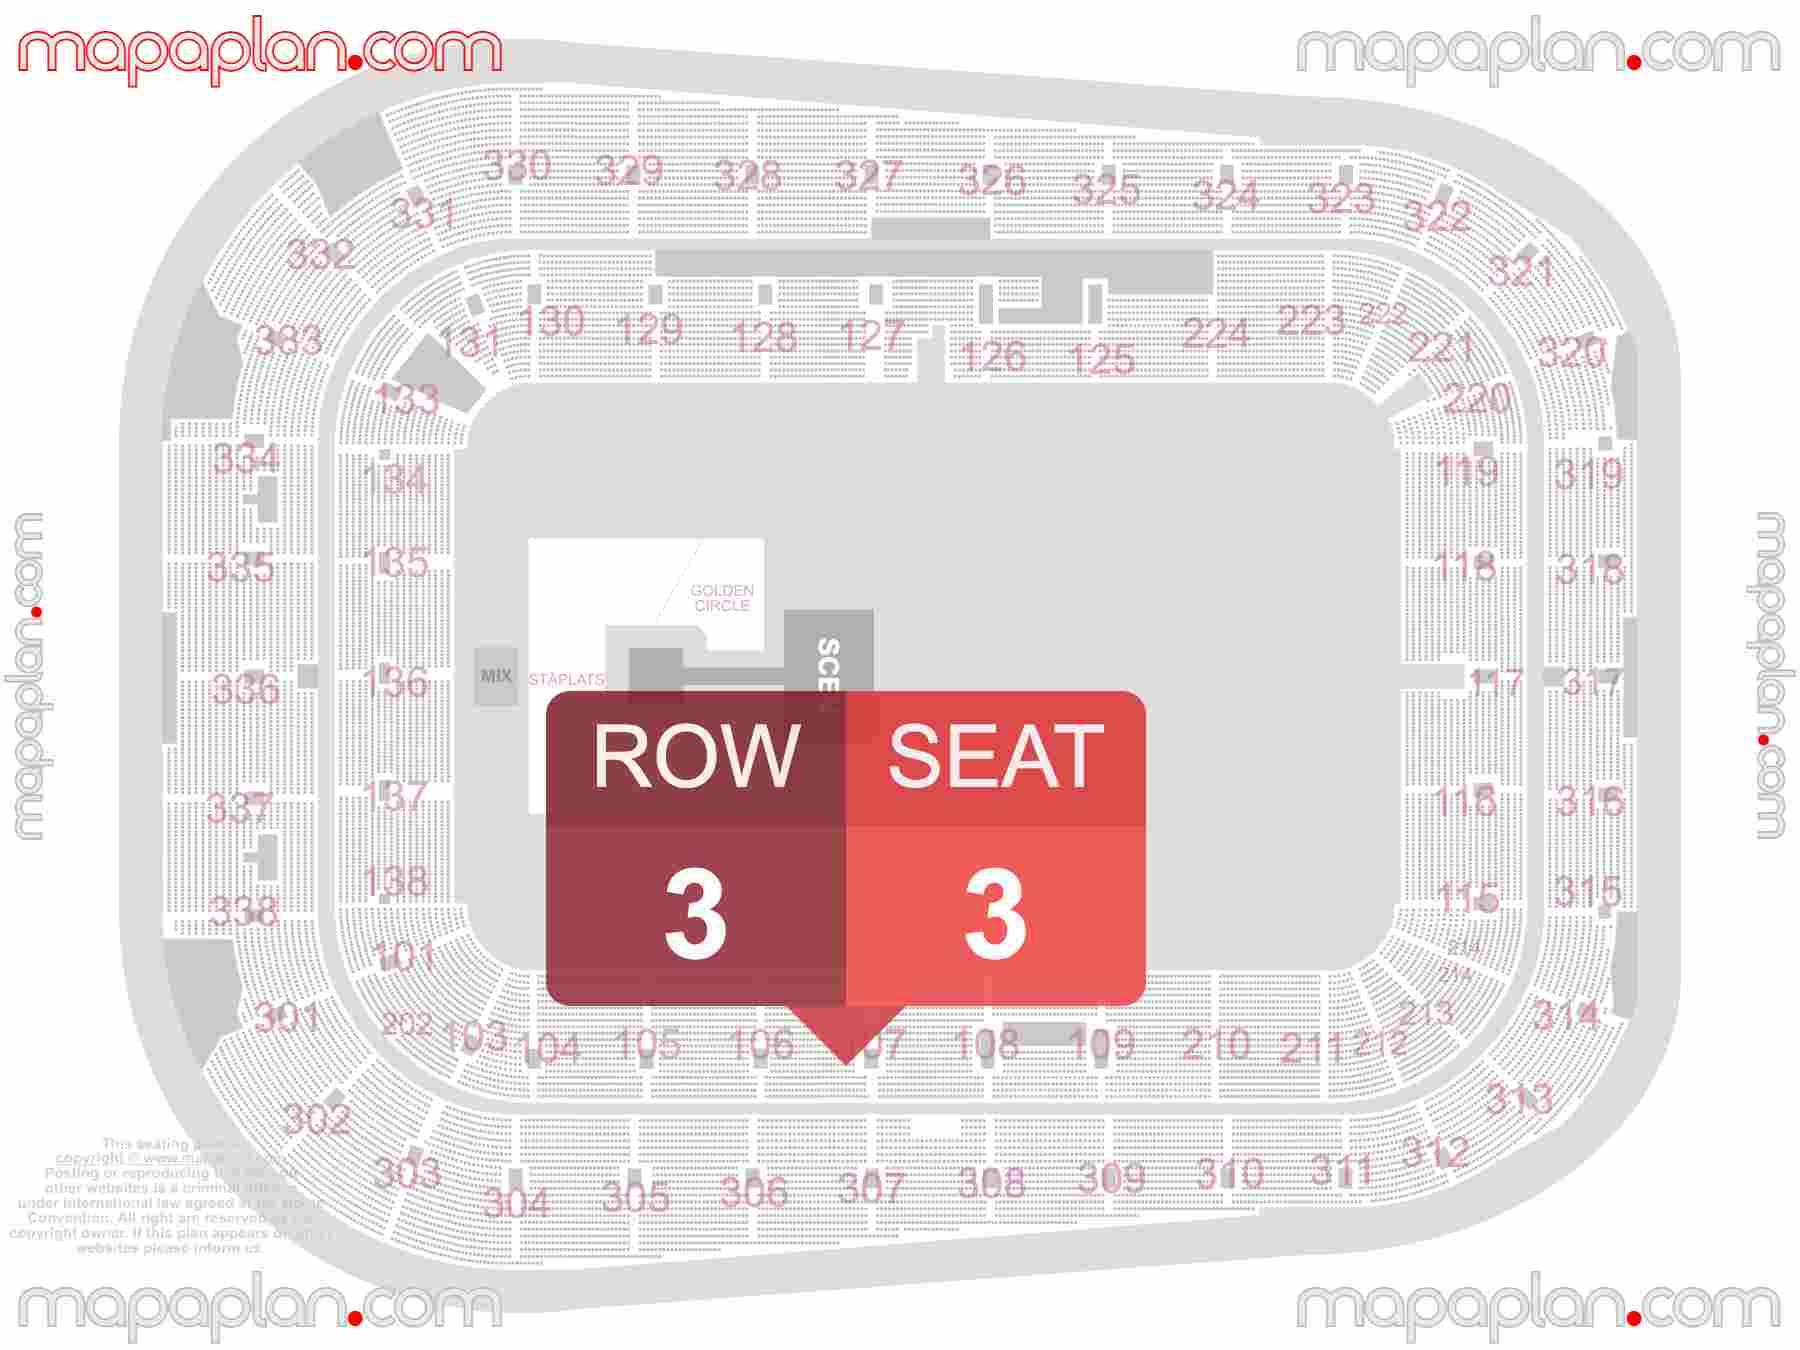 Stockholm Stockholmsarenan Tele2 Arena seating plan Concerts sittplatser karta med sektioner seating plan with exact section numbers showing best rows and seats selection 3d layout - Best interactive seat finder tool with precise detailed location data